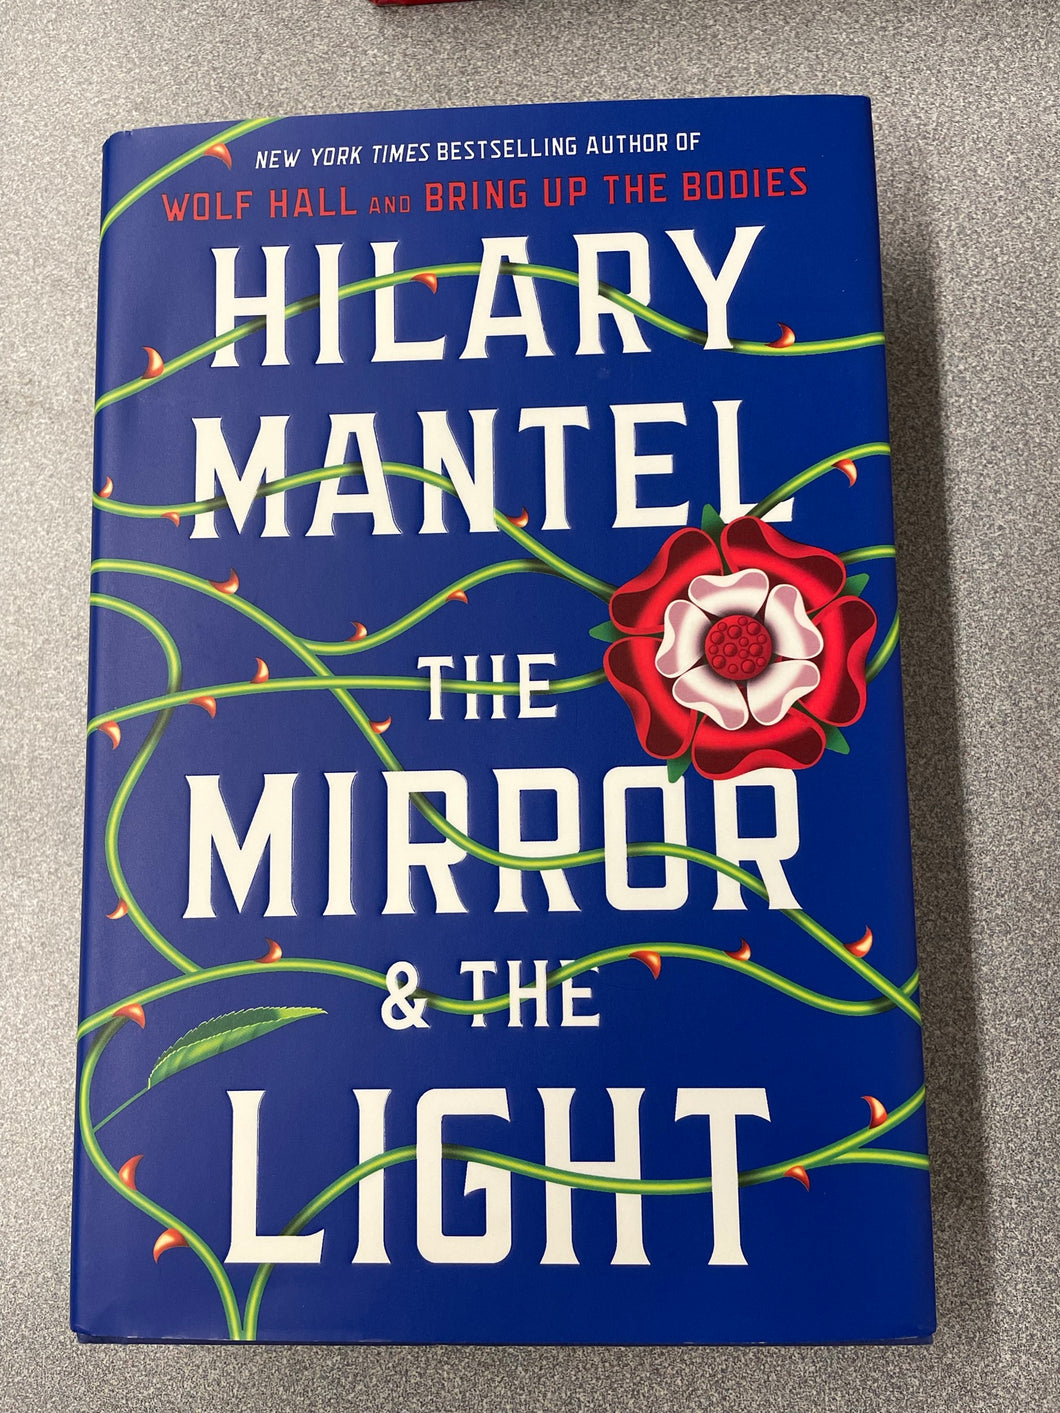 Mantel, Hilary, The Mirror and the Light [2020] AF 8/23